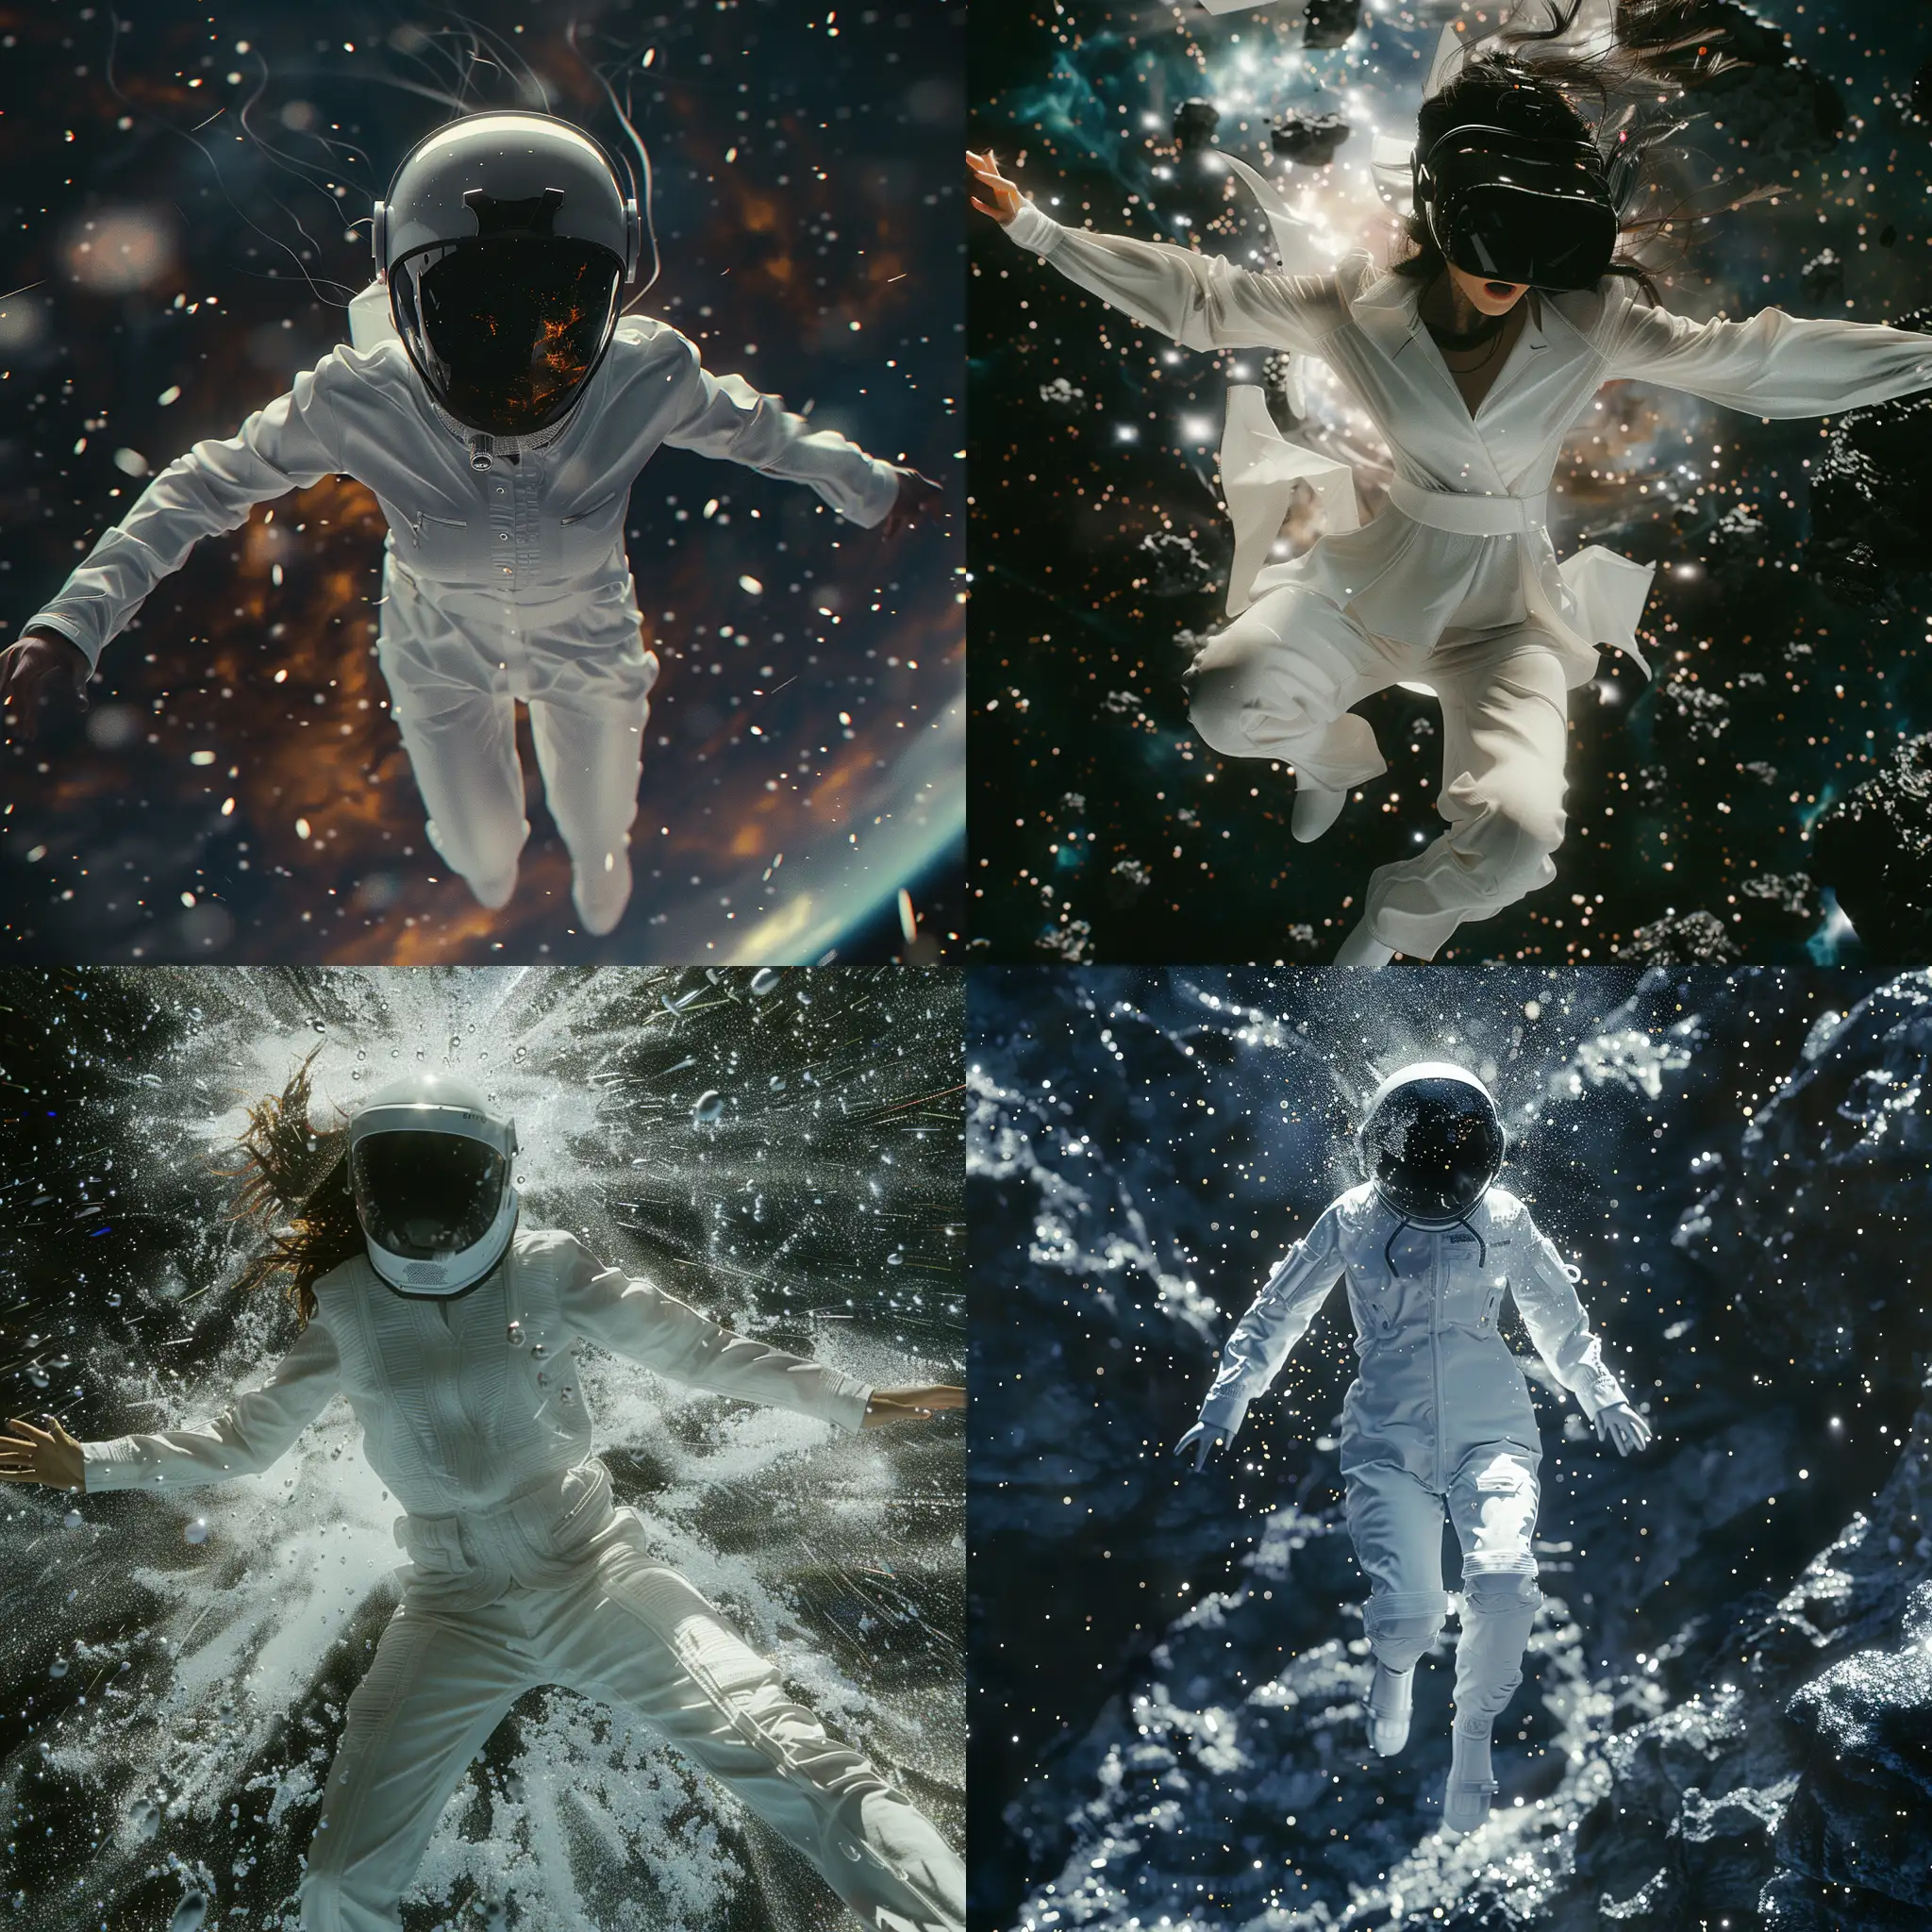 Girl-in-White-Space-Suit-Free-Falling-in-Cosmic-Landscape